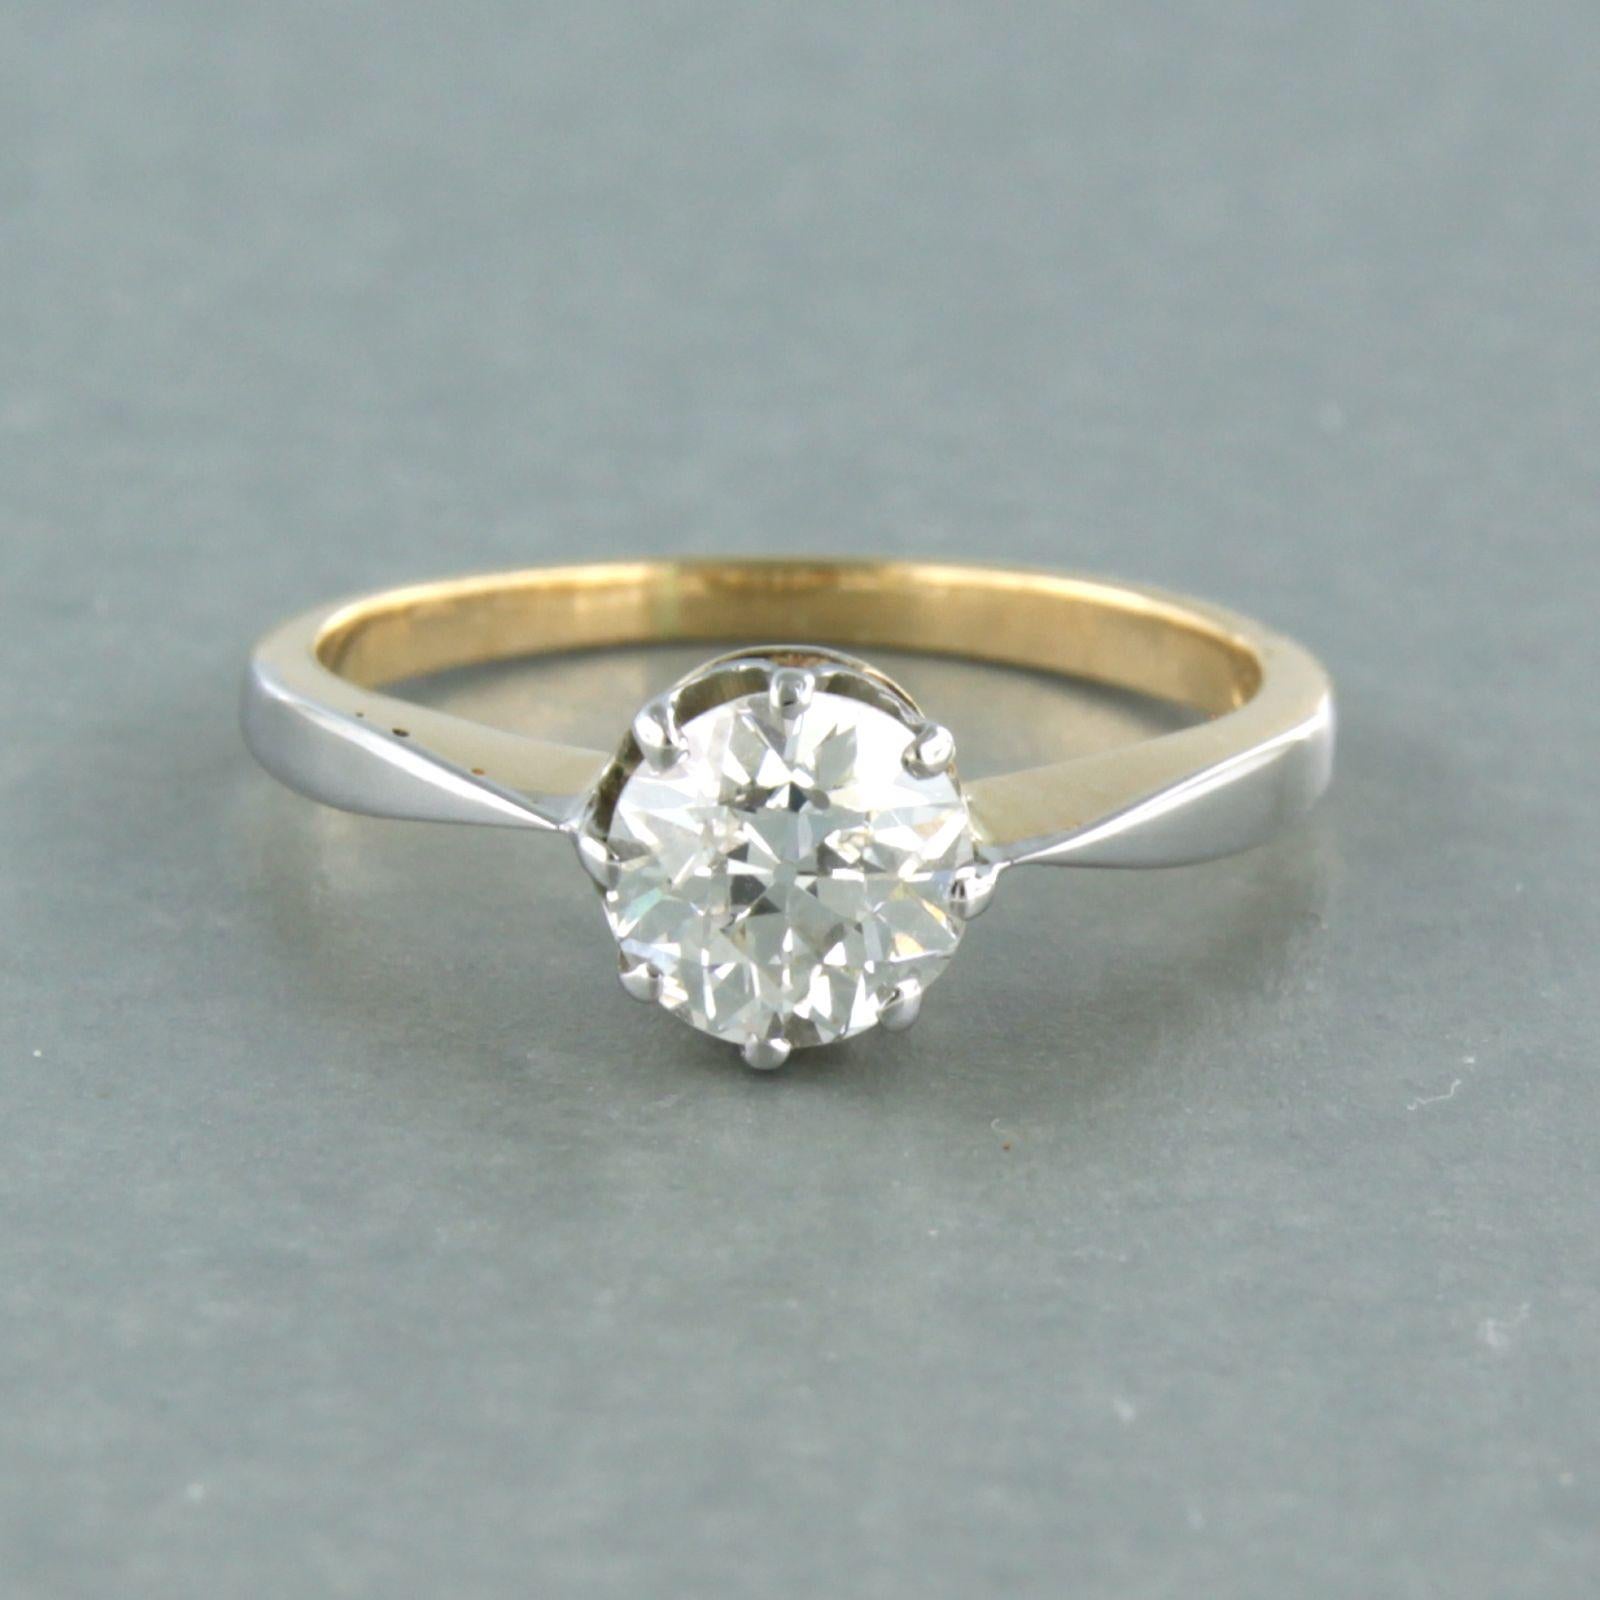 14k bicolor gold solitaire ring set with old mine cut diamond. 1.00ct - I - SI2 - ring size U.S. 5 - EU. 15.75 (49)

detailed description:

the top of the ring is 6.7 mm wide by 6.0 mm high

weight 2.6 grams

ring size US 5 - EU. 15.75 (49), ring